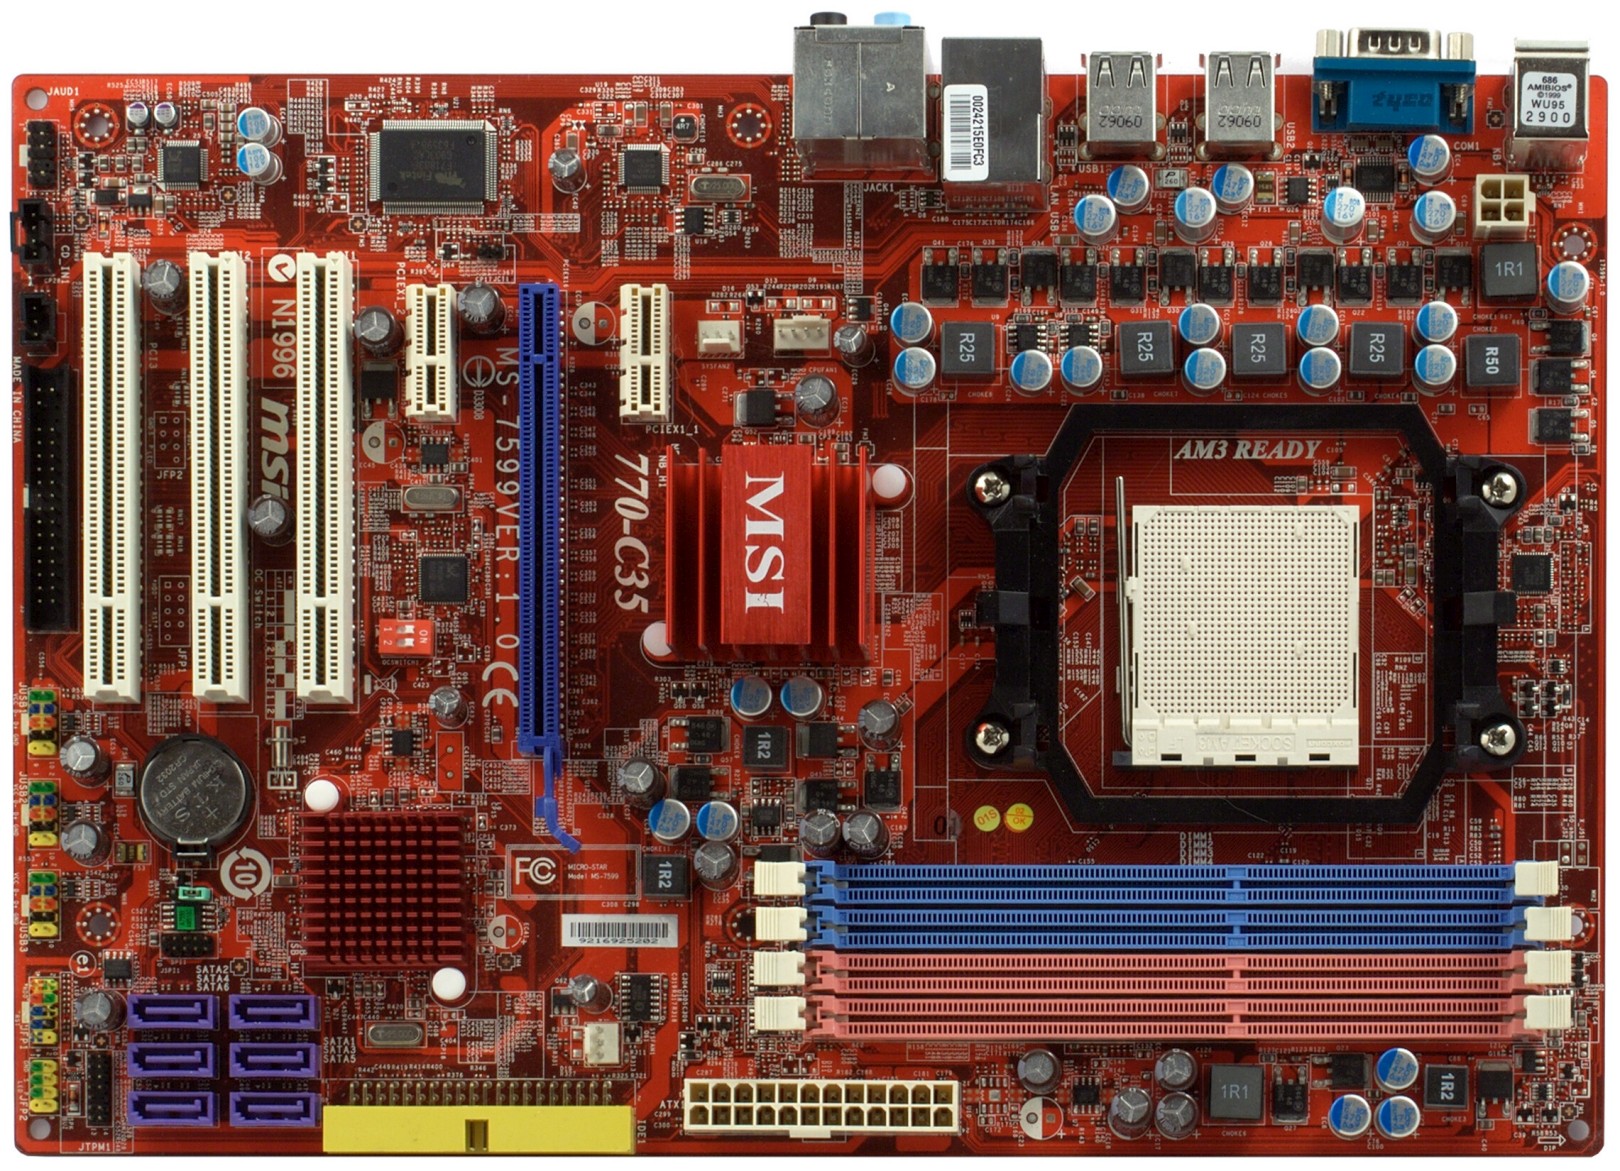 Vend om smerte Thicken iXBT Labs - MSI 770-C35 Motherboard - Page 1: Introduction, design